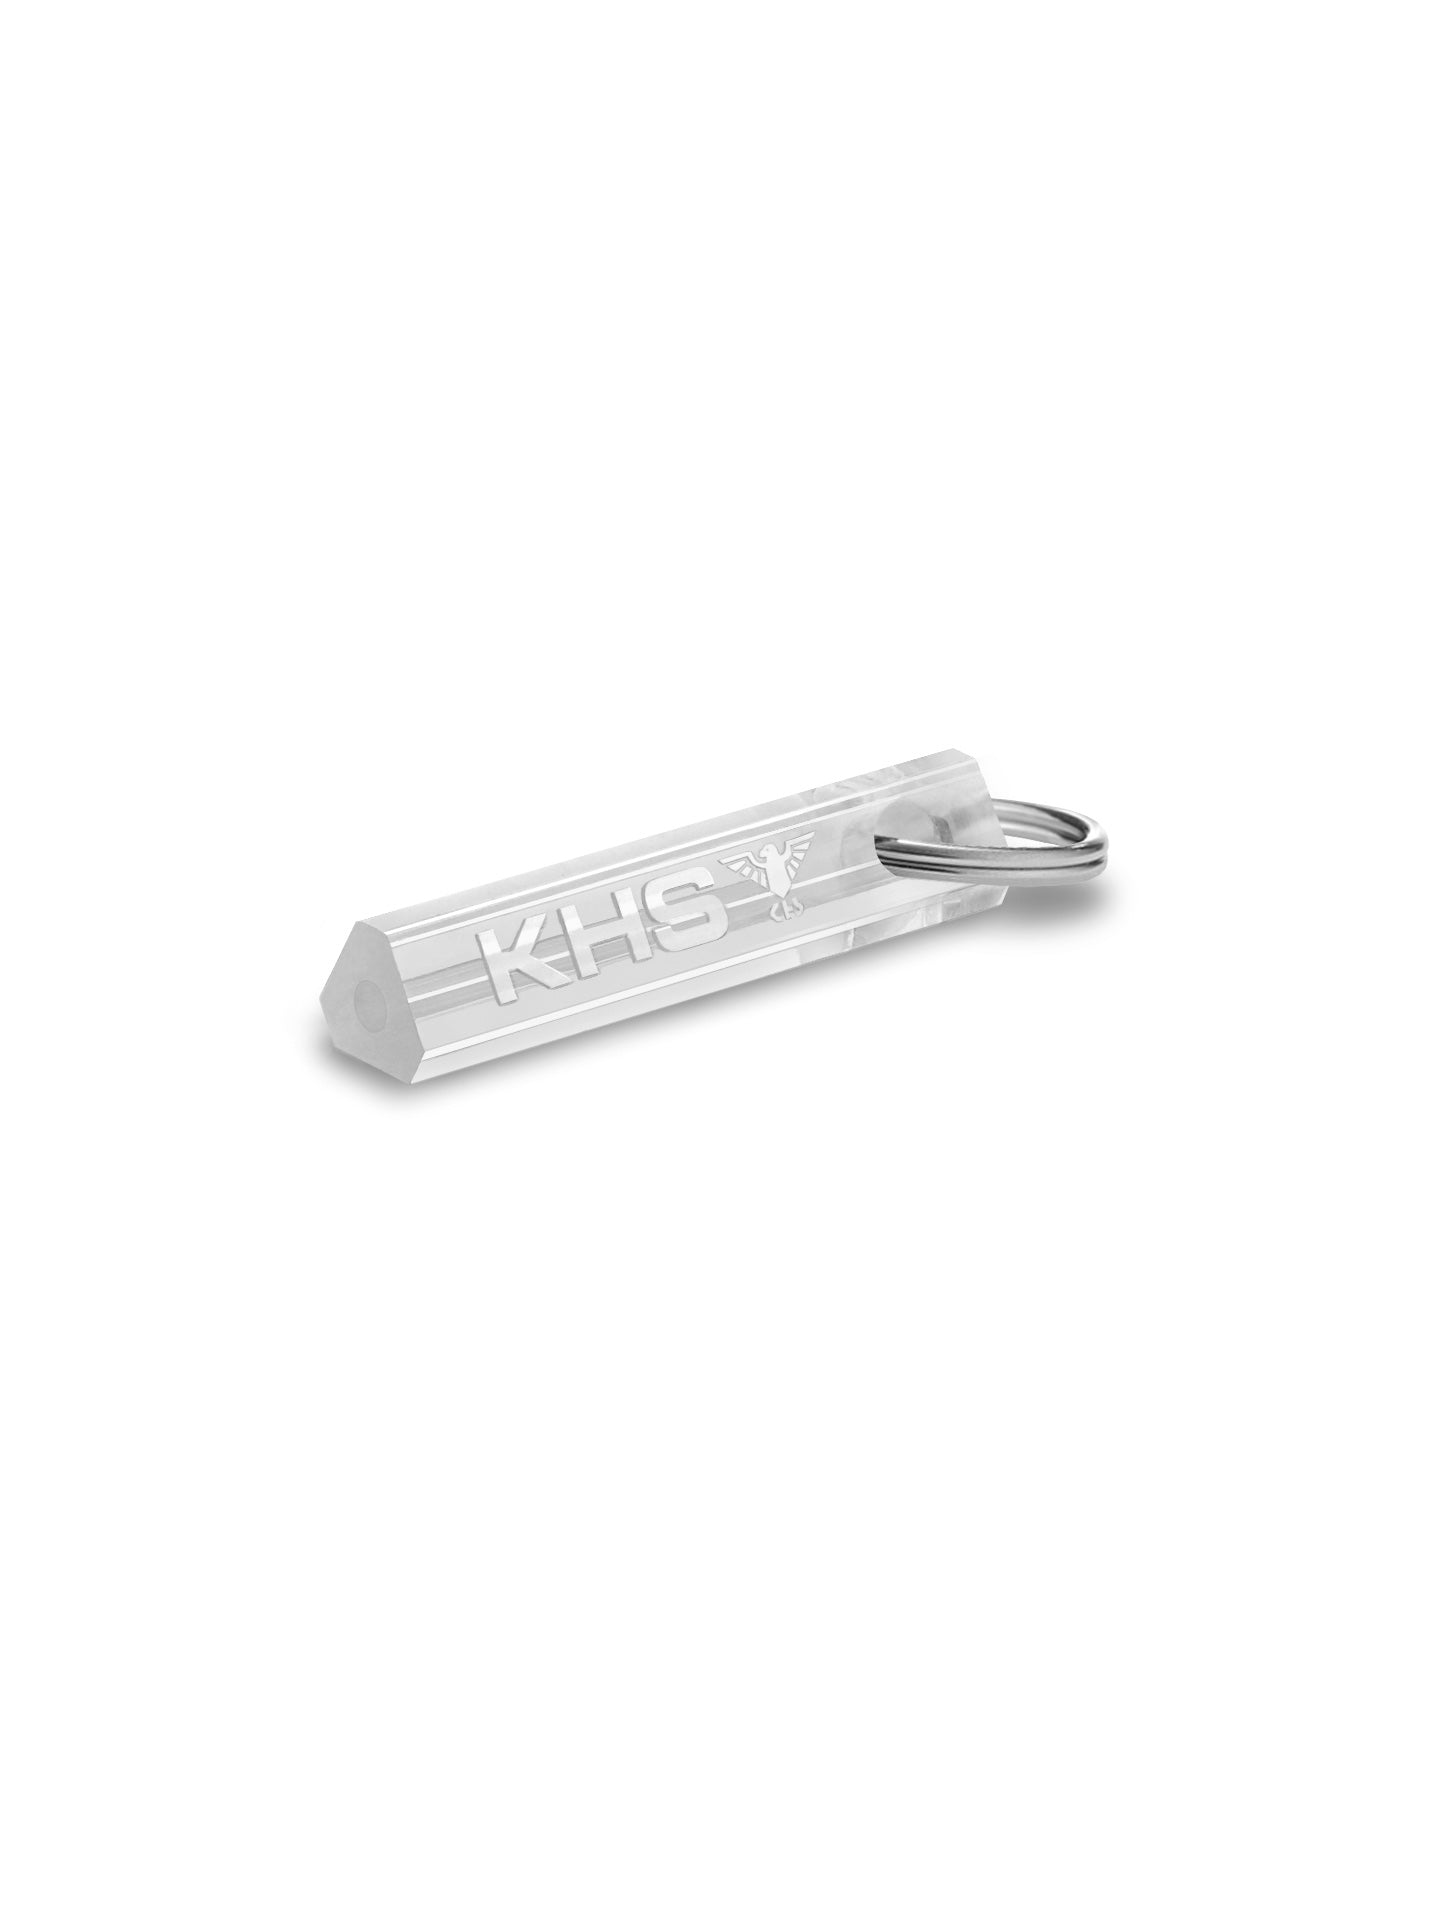 5 TRIGATAGS® with key ring